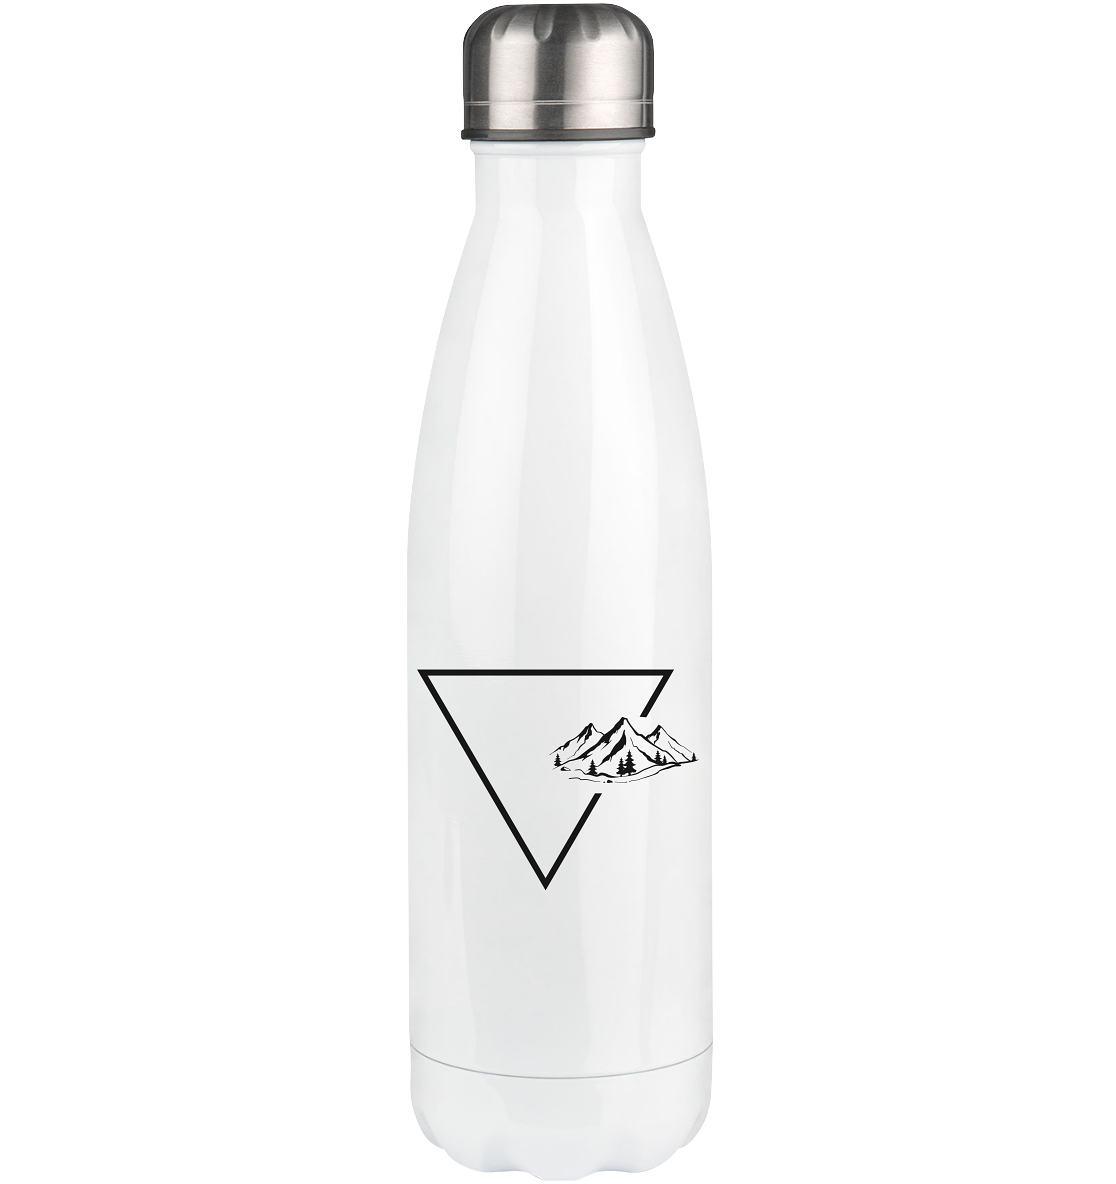 Triangle 1 and Mountain - Edelstahl Thermosflasche berge 500ml